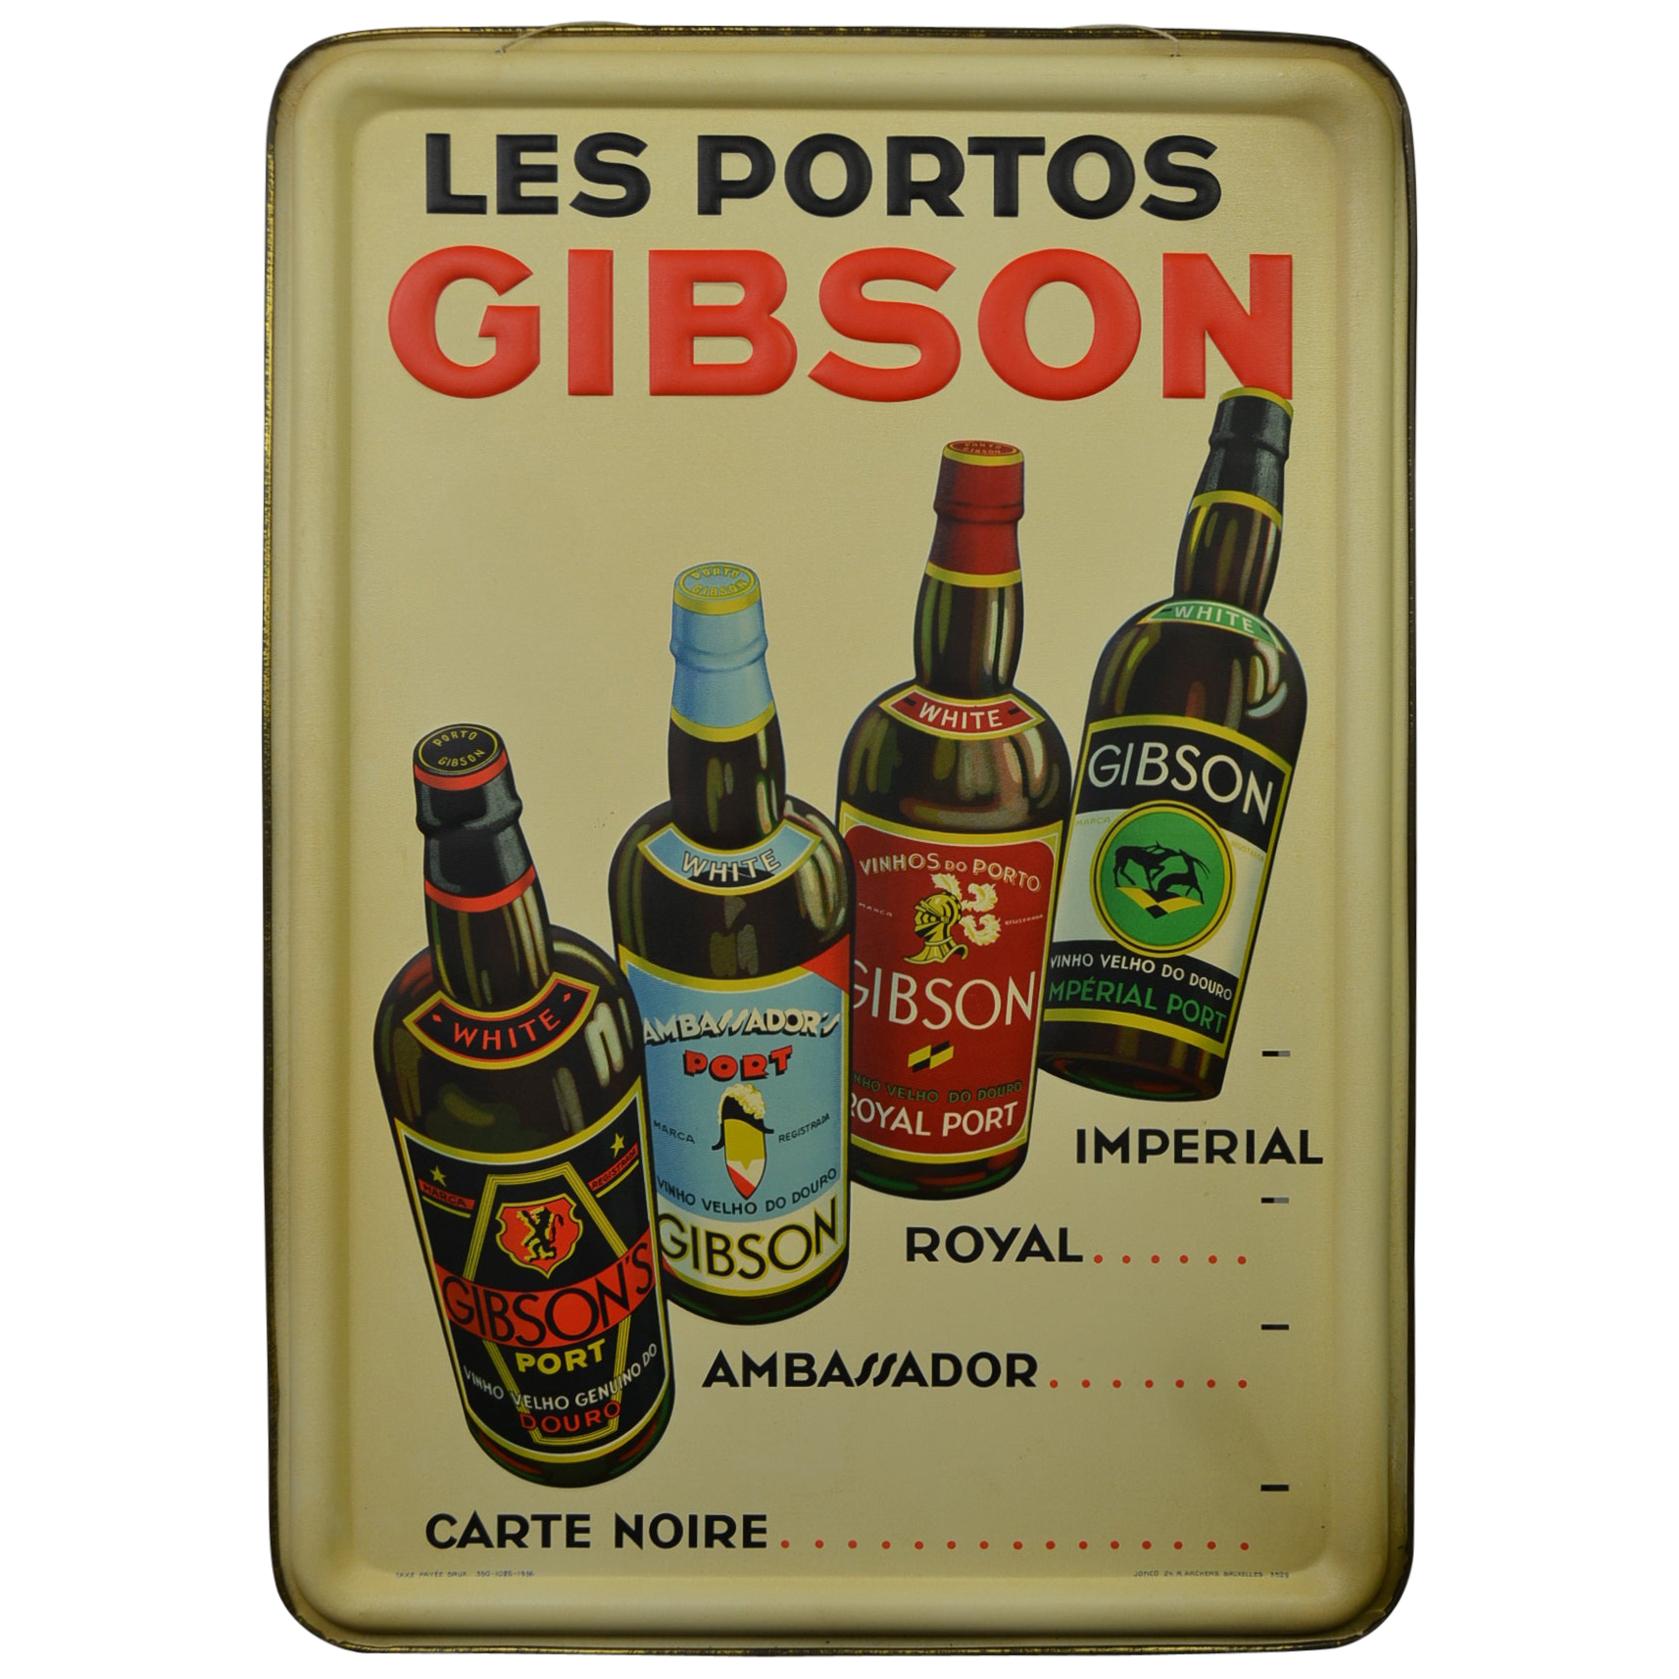 1936 Tin Sign for Les Portos Gibson, Appetizer Drink